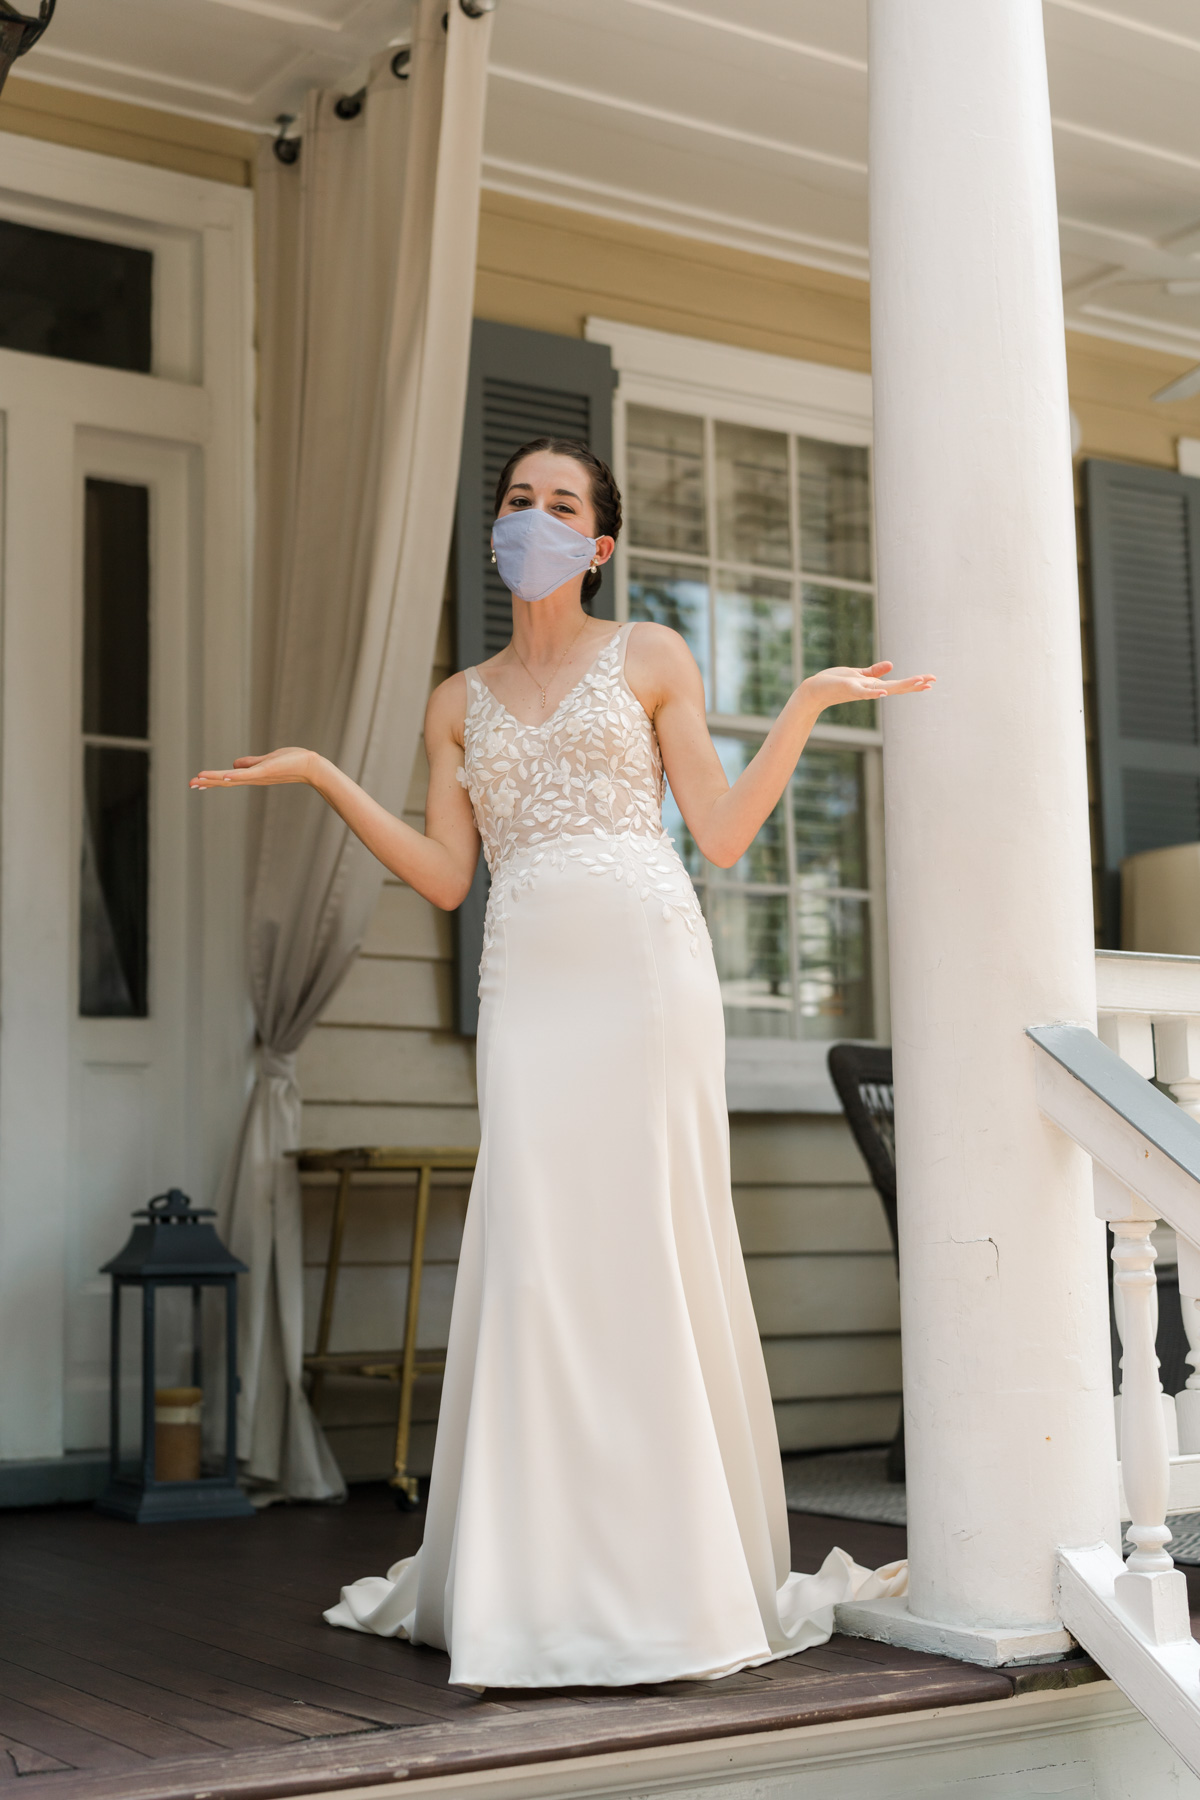 Bride wearing a mask to prevent the spread of coronavirus 